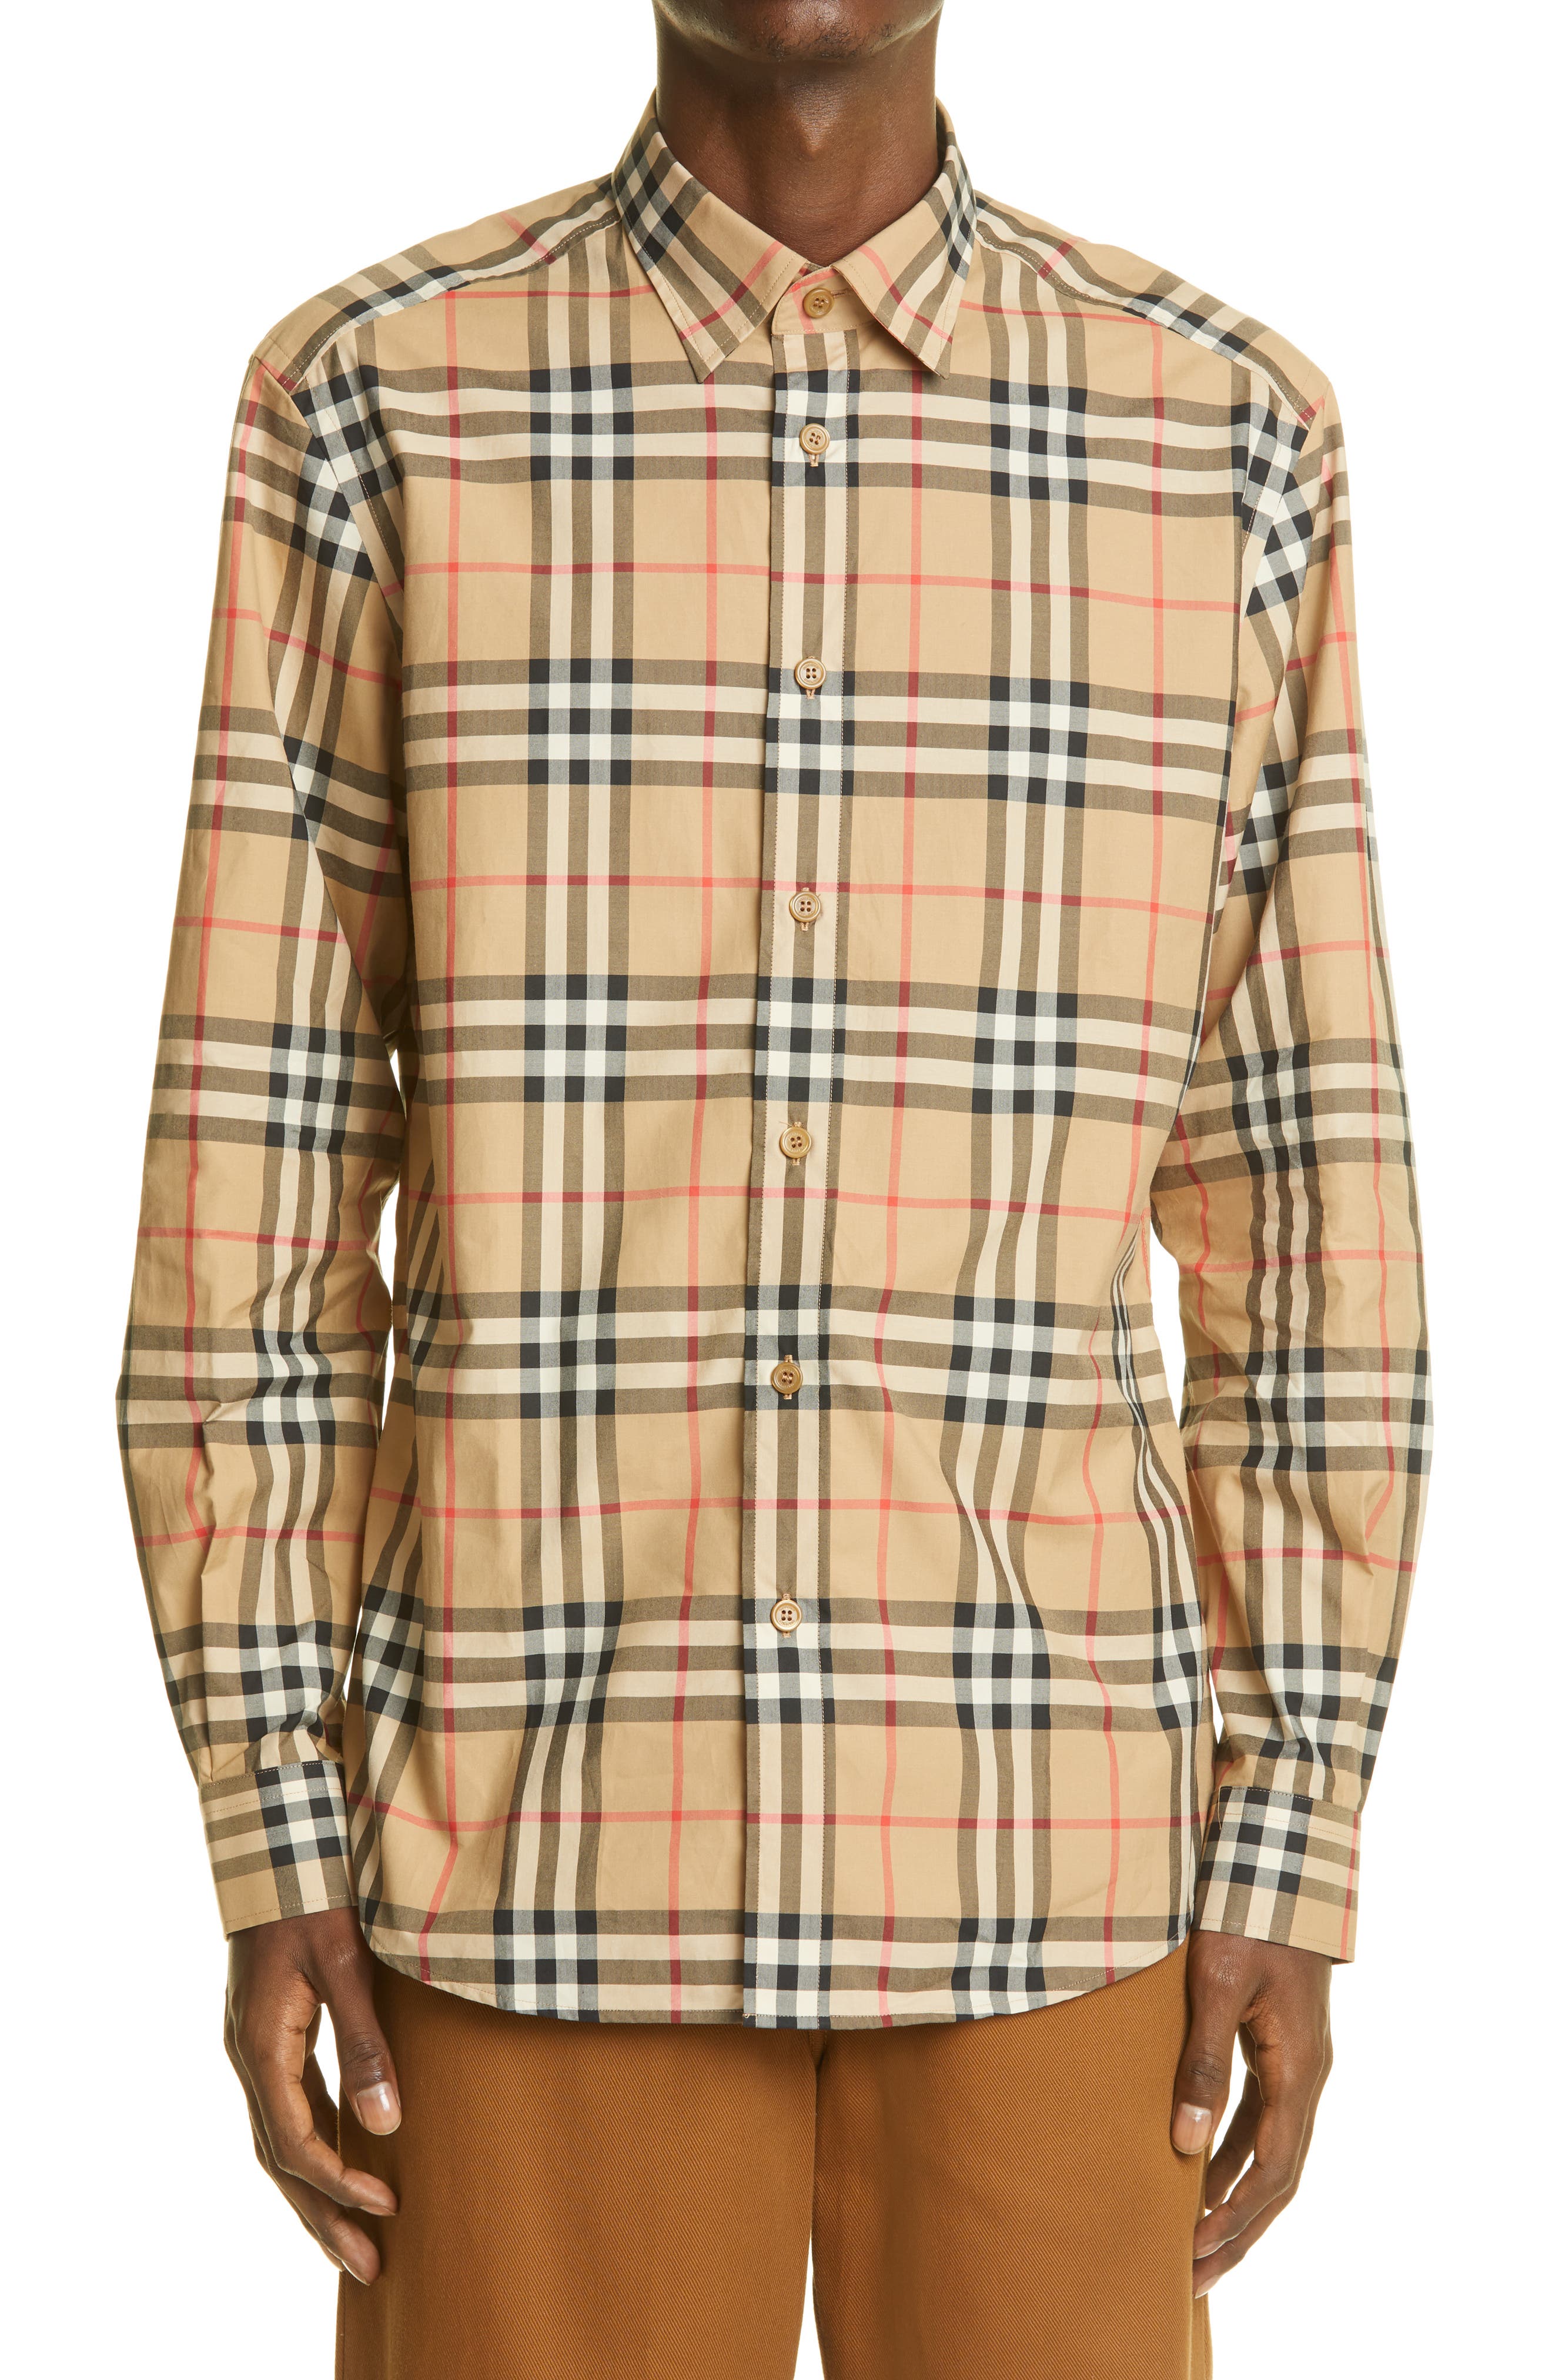 Burberry Caxton Check Poplin Button-Up Shirt in Archive Beige Ip Chk at Nordstrom, Size Small Us